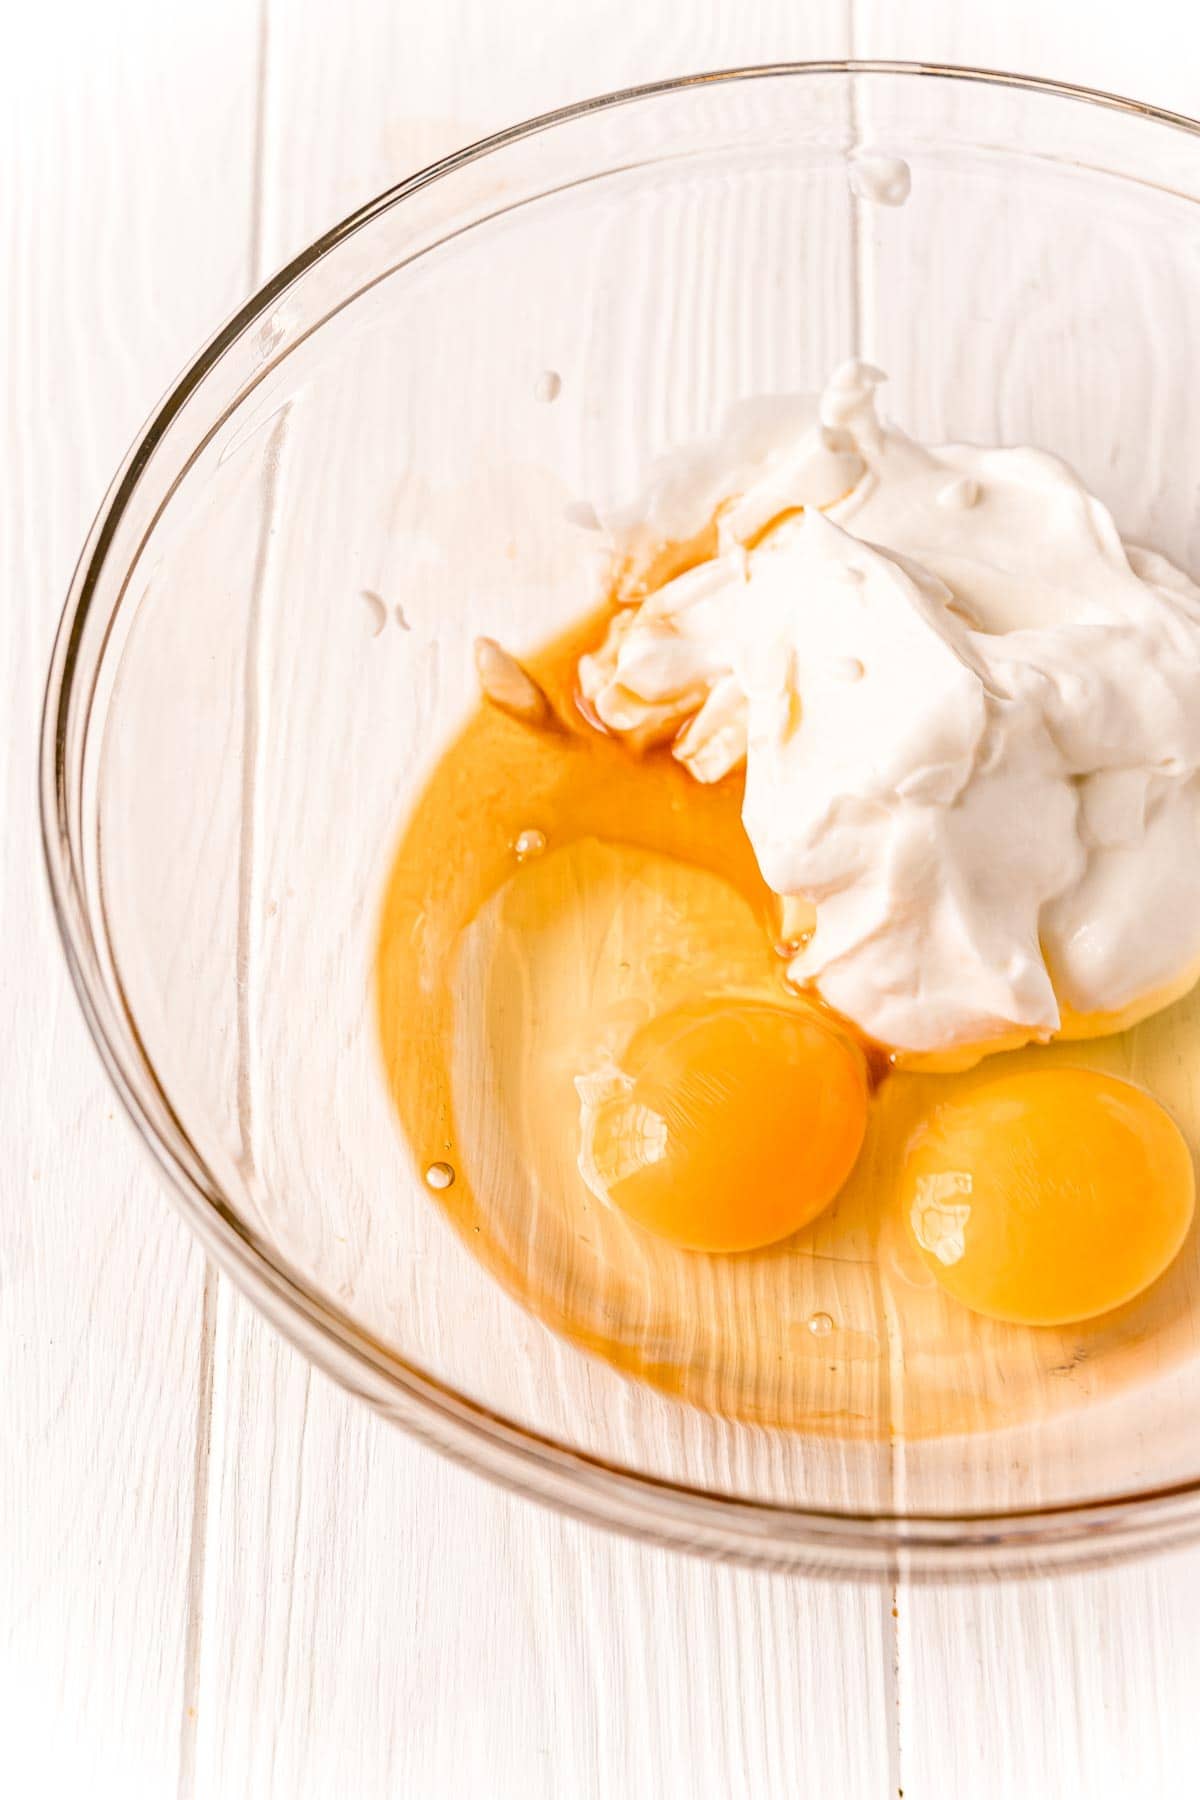 eggs and yogurt in a glass bowl